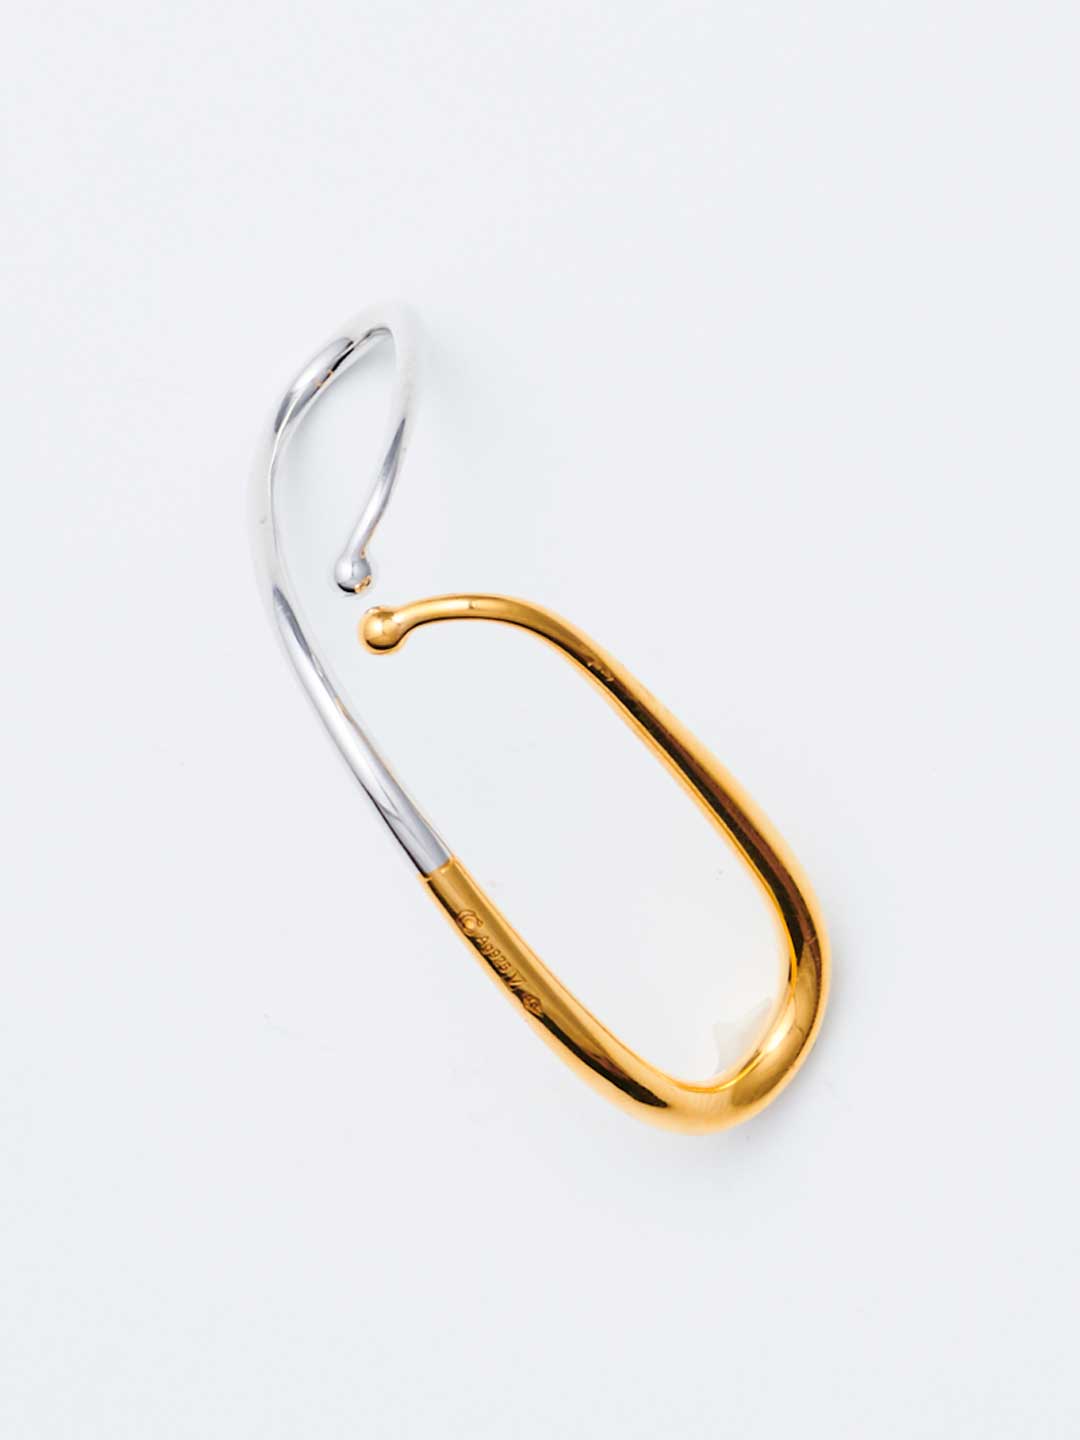 Mirage Ear Cuff LEFT- Silver/Yellow Gold